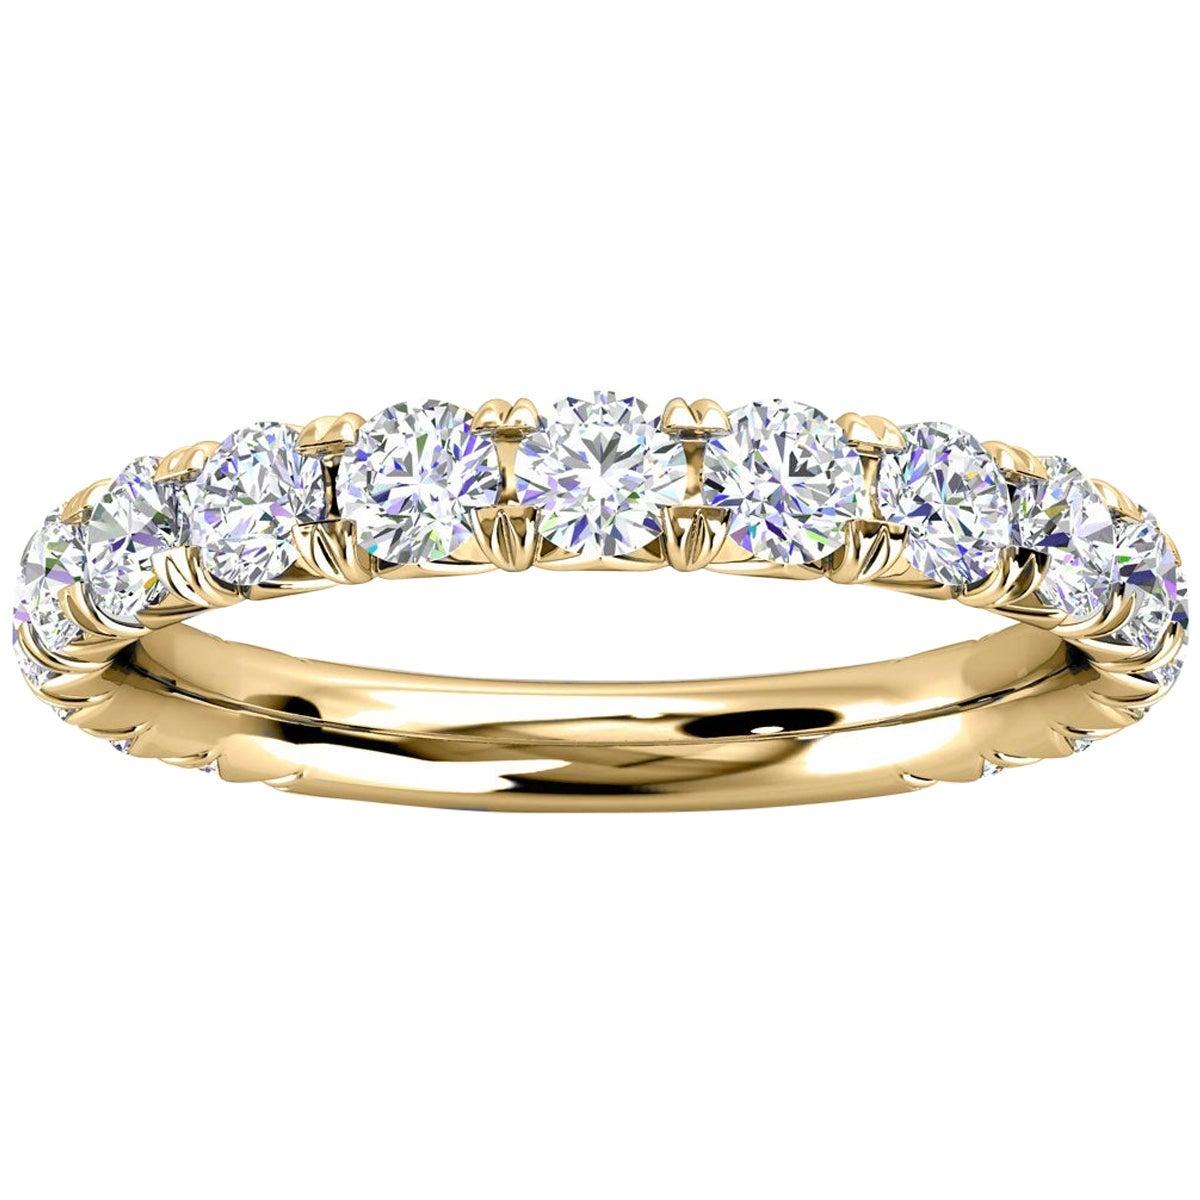 For Sale:  14k Yellow Gold GIA French Pave Diamond Ring '1 Ct. Tw'